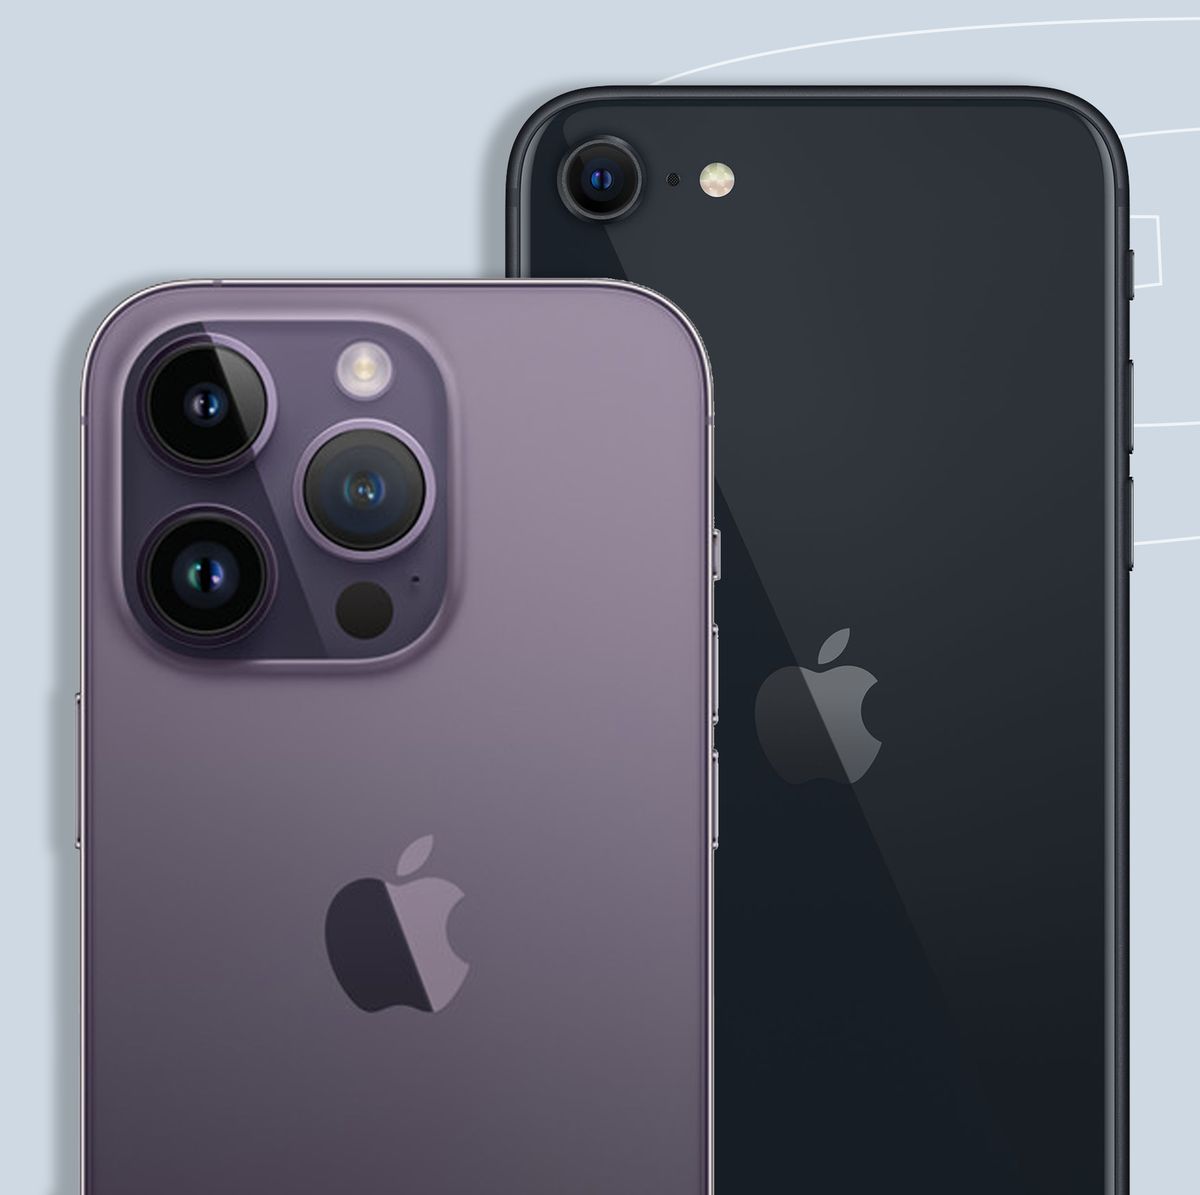 Why I'd like to see an iPhone 14 Pro mini